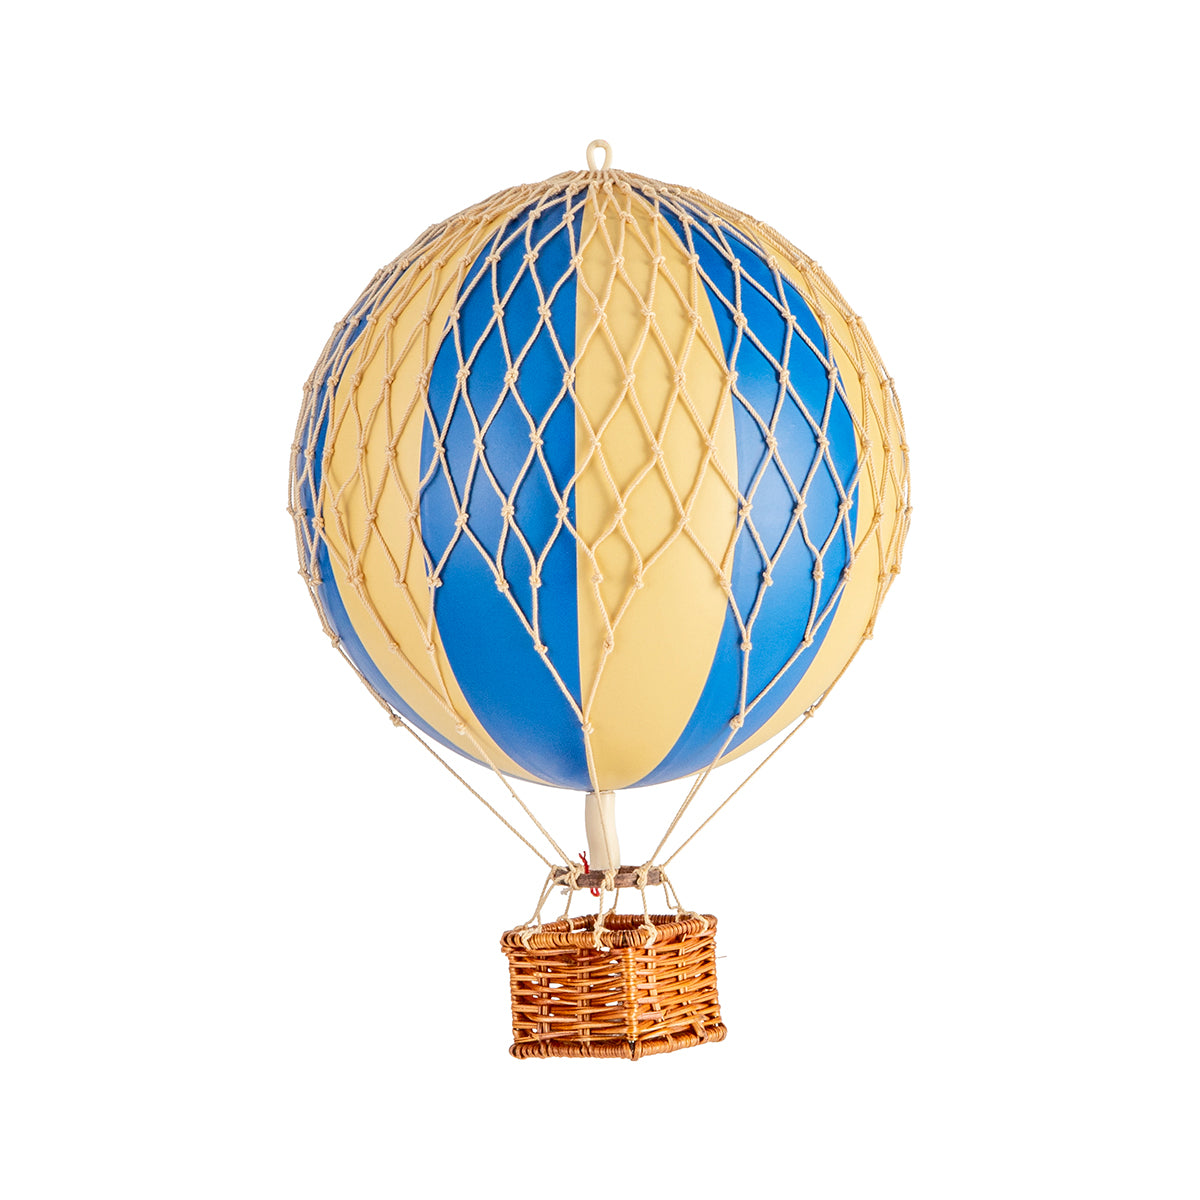 A quirky Wonderen Small Hot Air Balloon - Travels Light on a white background.